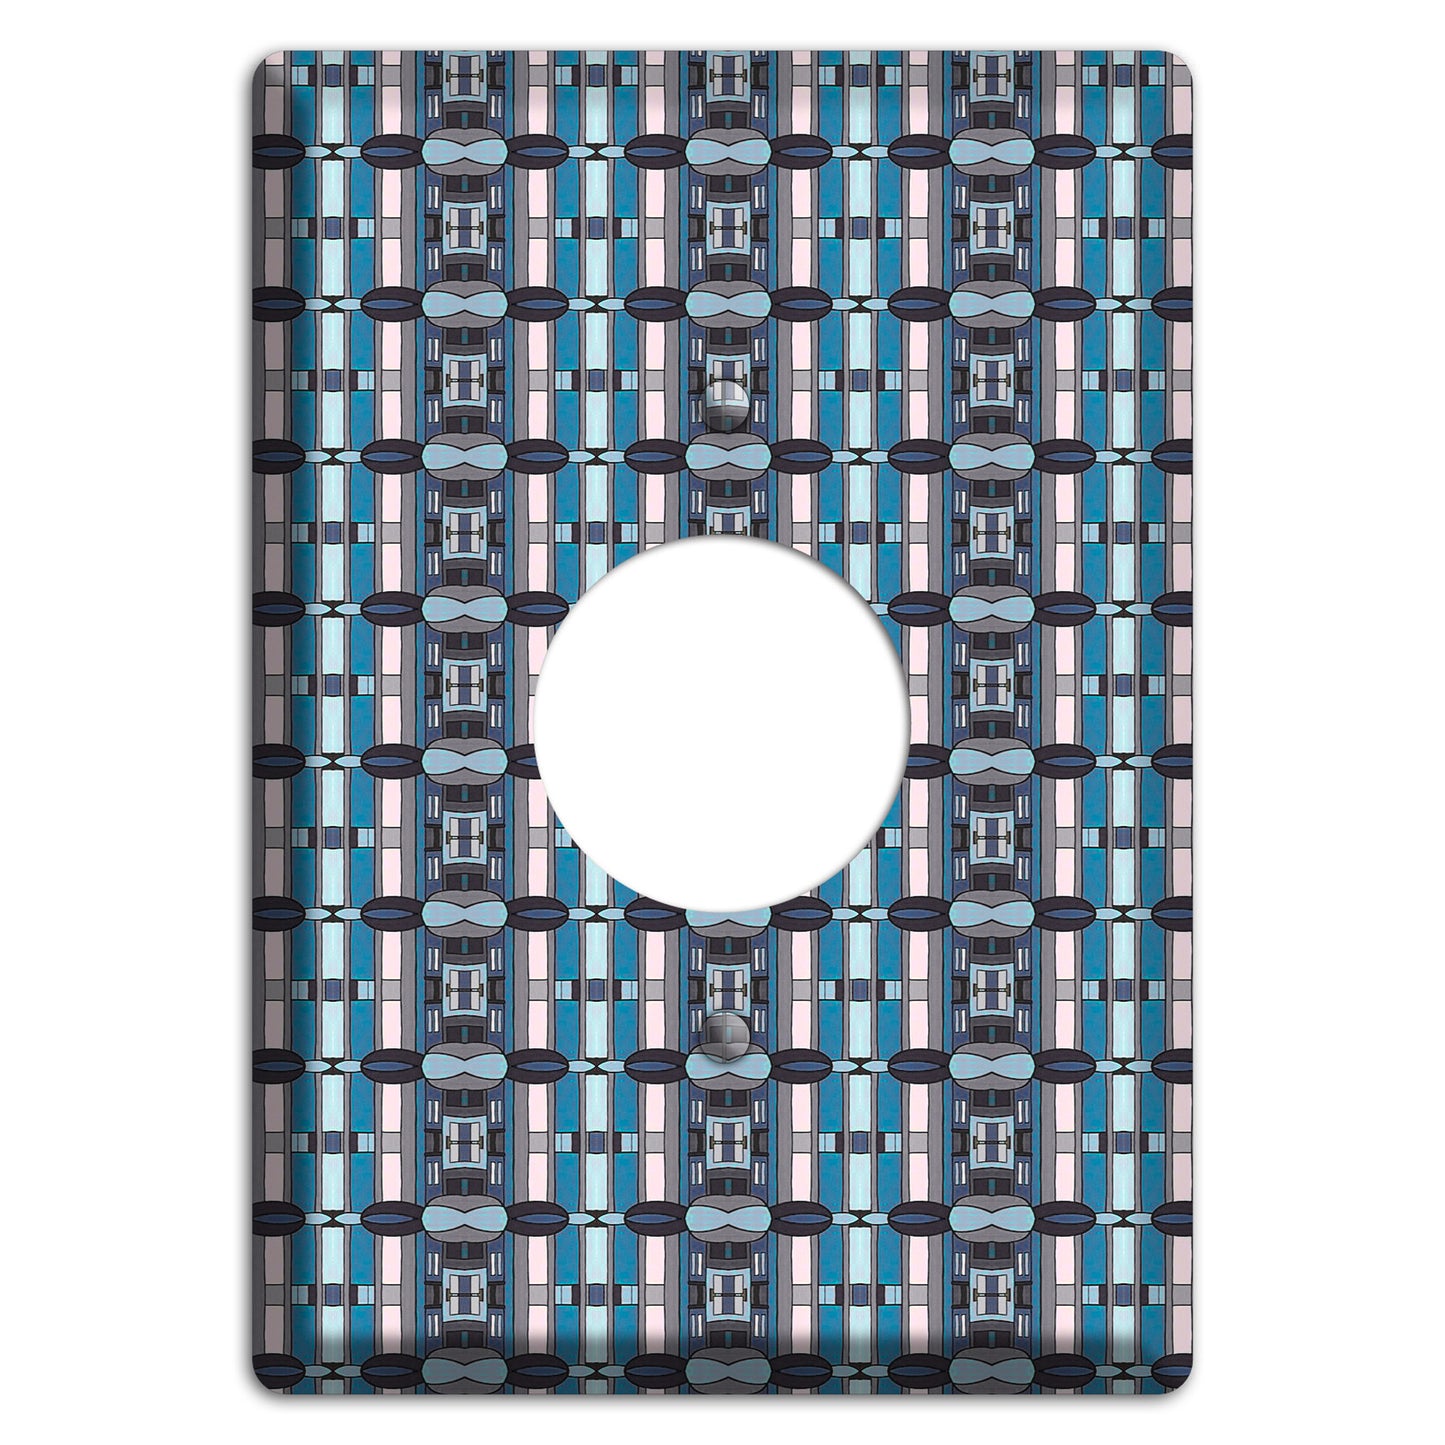 Blue and Grey Tapestry Single Receptacle Wallplate